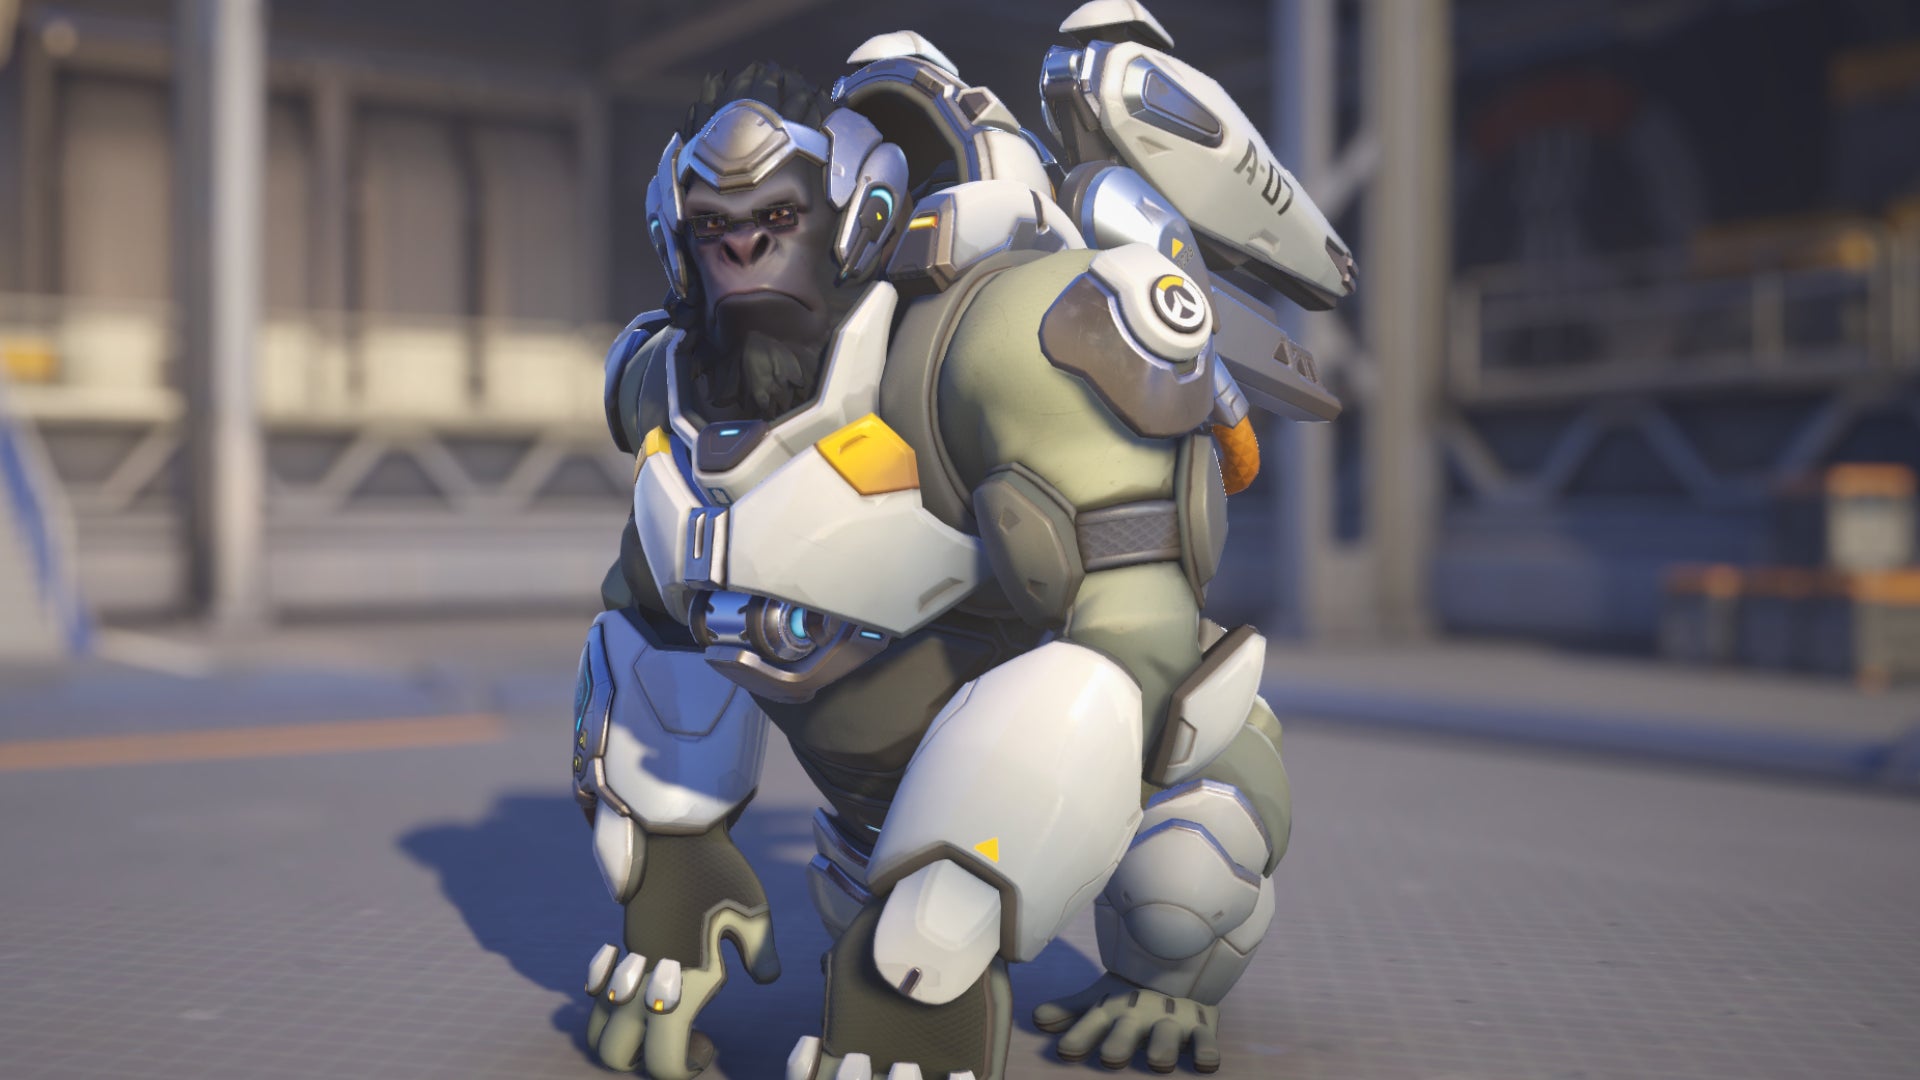 Winston, a hero in Overwatch 2, poses before the camera in the hero selection screen.